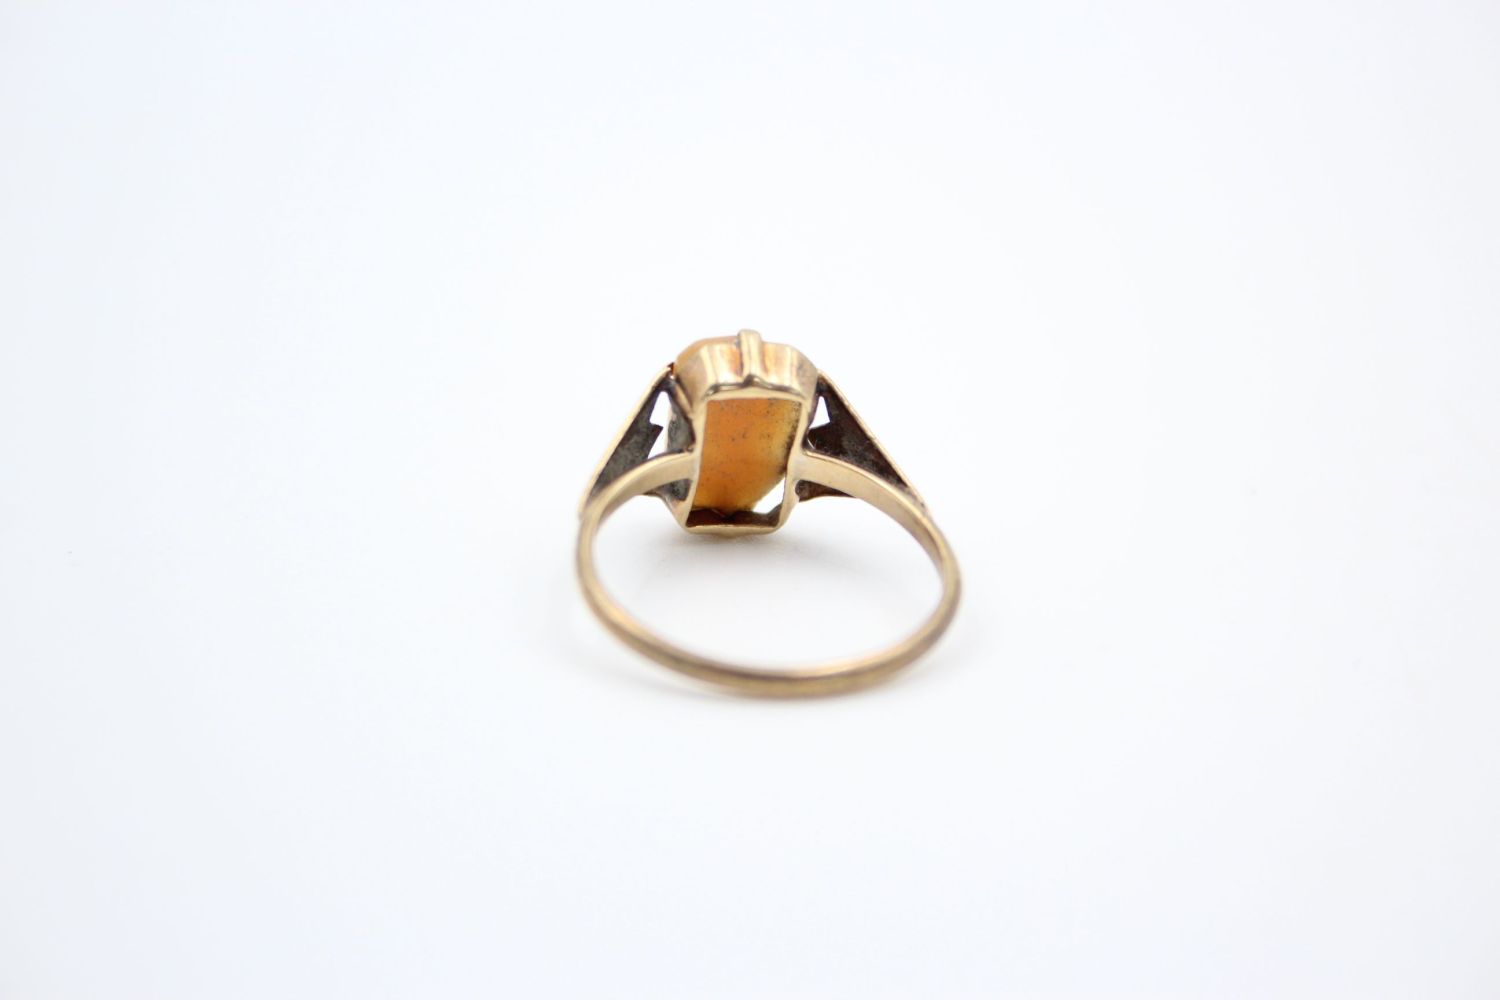 2 x 9ct gold cameo rings 4.9 grams gross - Image 9 of 11